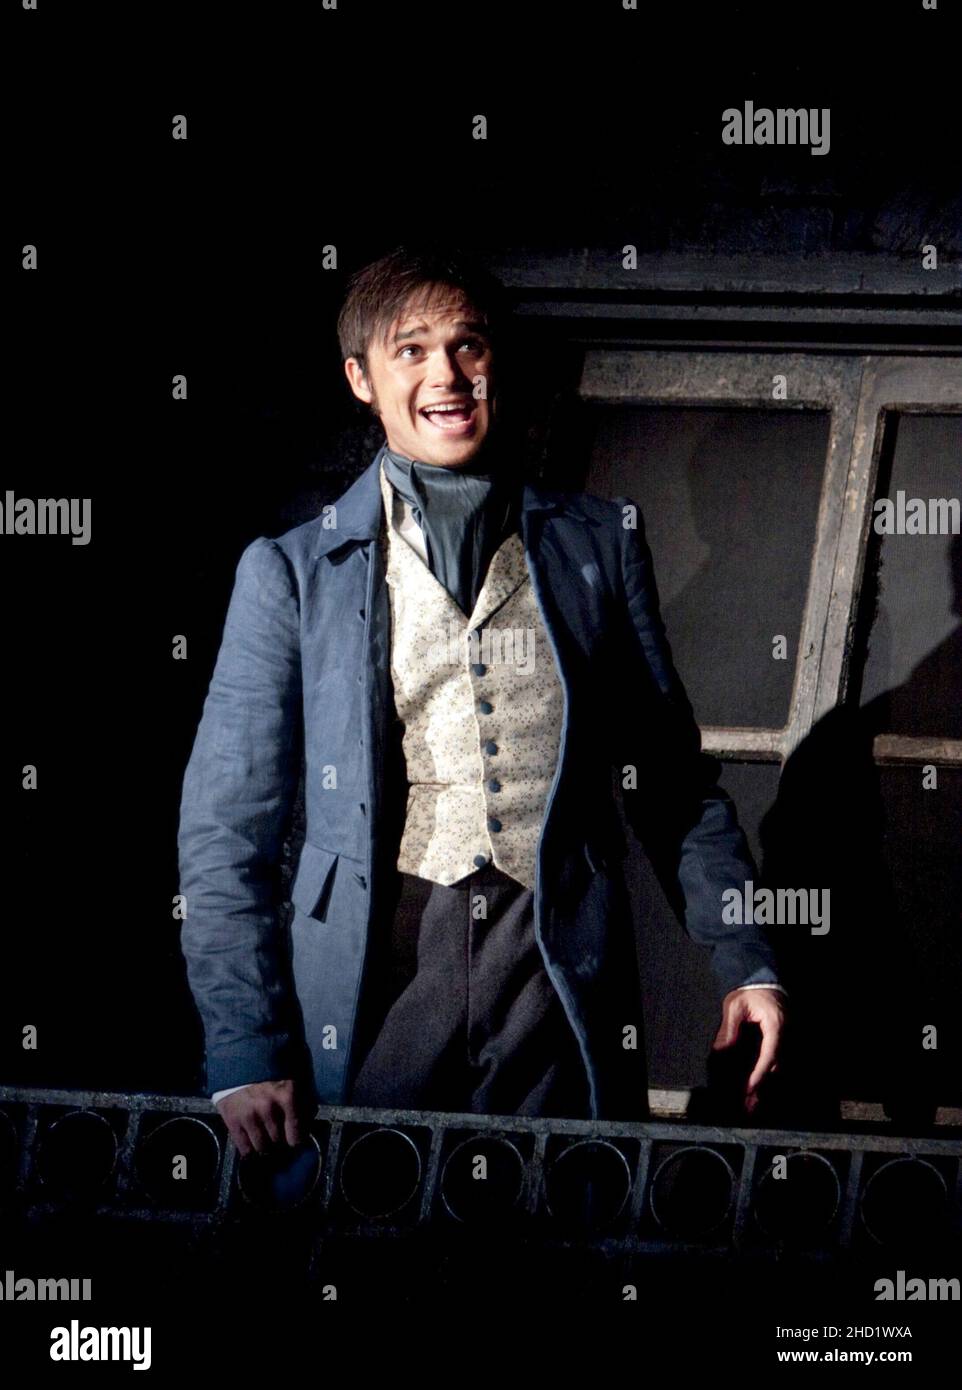 Gareth Gates (Marius) in LES MISERABLES at the Barbican Theatre, London EC2  14/09/2010  music: Claude-Michel Schönberg  text: Herbert Kretzmer  original text by Alain Boubil & Jean-Marc Natel  additional material: James Fenton  based on the novel by Victor Hugo  original production adapted & directed by Trevor Nunn & John Caird  set design: Matt Kinley  costumes: Andreanne Neofitou  lighting: Paule Constable  directors: Laurence Connor & James Powell Stock Photo